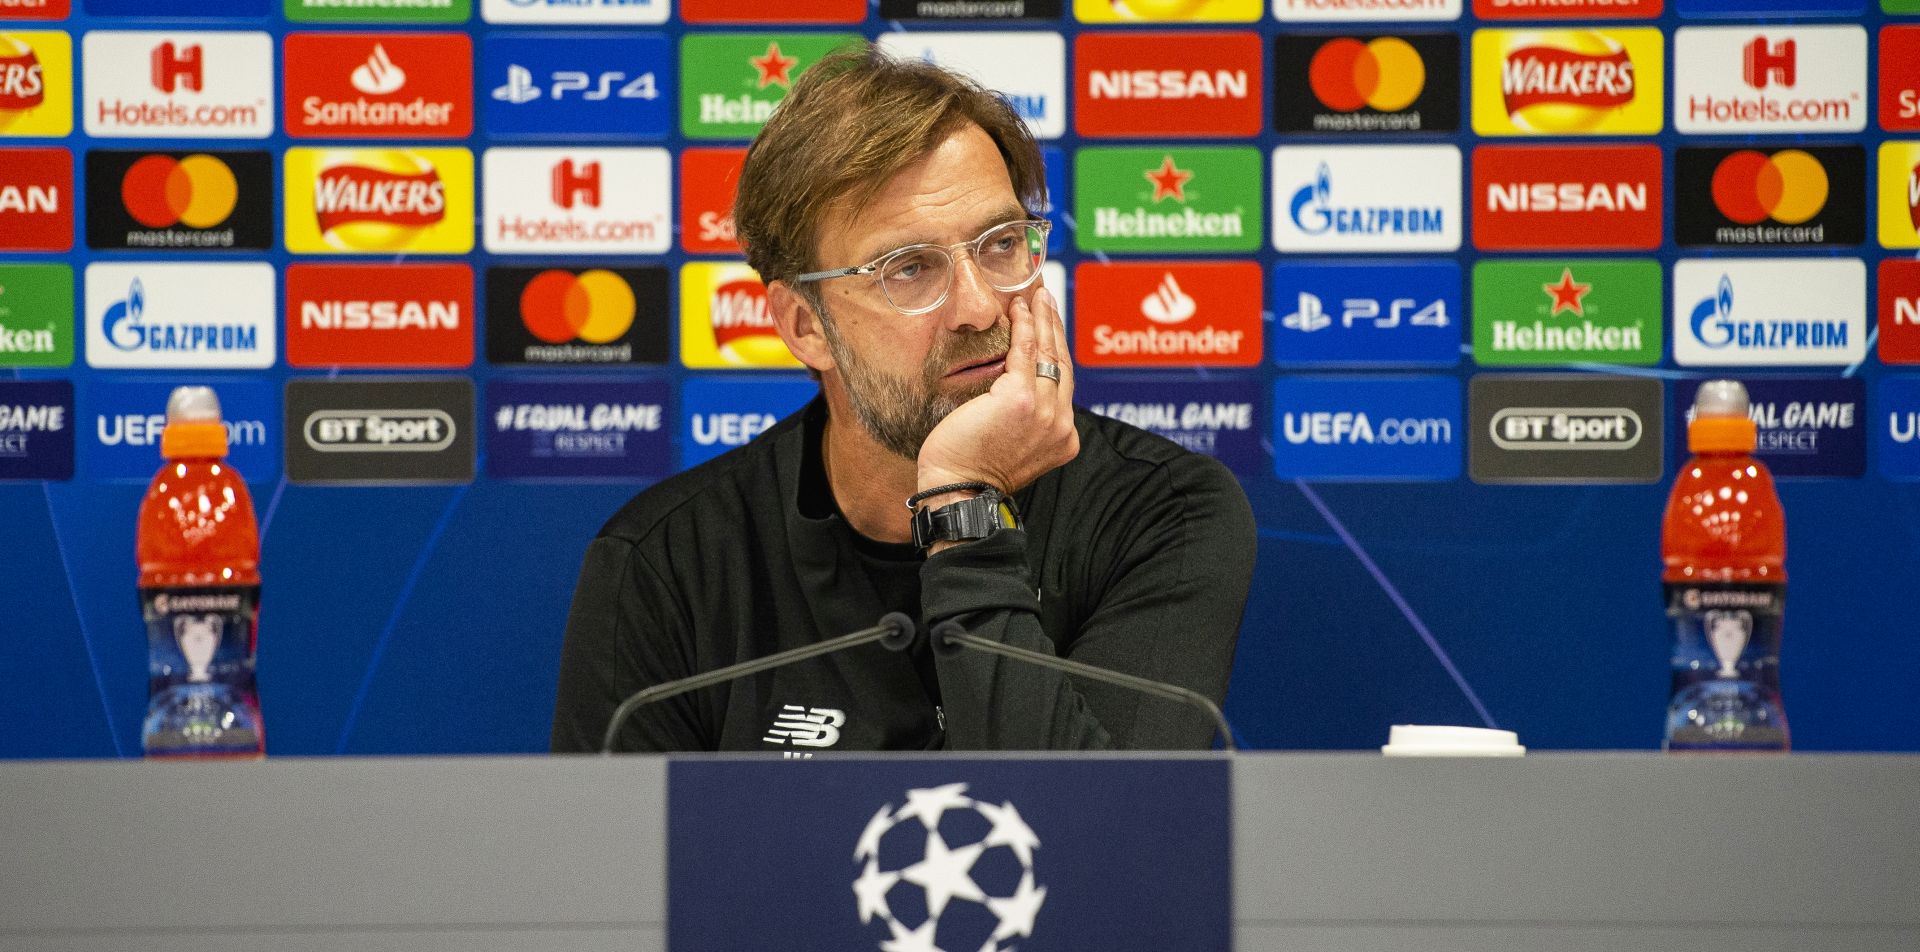 epa07492038 Liverpool's manager Juergen Klopp attends a press conference in Anfield Stadium in Liverpool, Britain, 08 April 2019. Liverpool FC will face FC Porto in their UEFA Champions League quarter final, first leg soccer match on 09 April 2019.  EPA/PETER POWELL